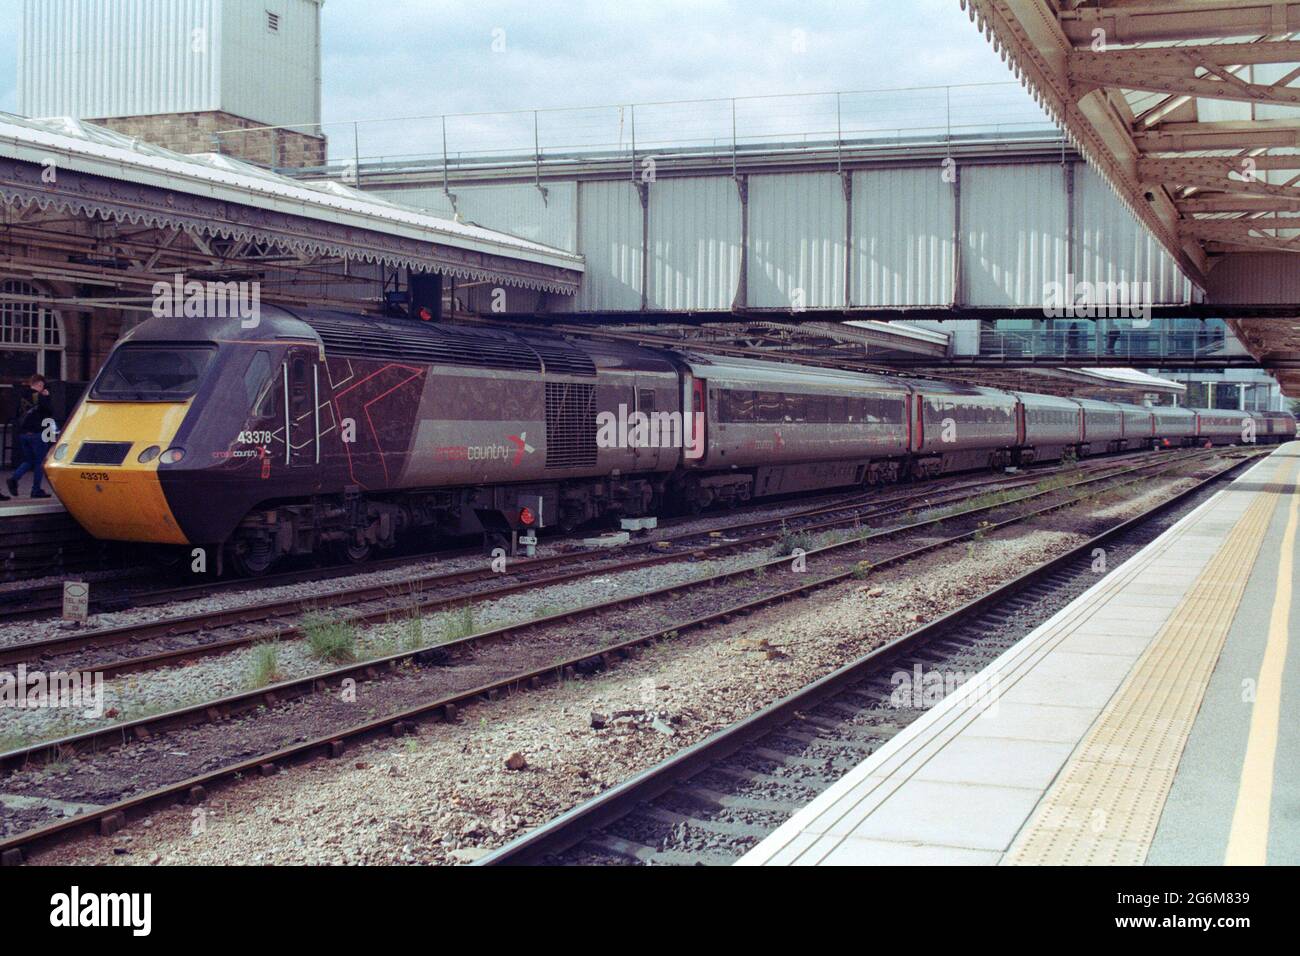 Sheffield, UK - 22 May 2021: A HST (High Speed Train) operation by CrossCountry at Sheffield station. Stock Photo